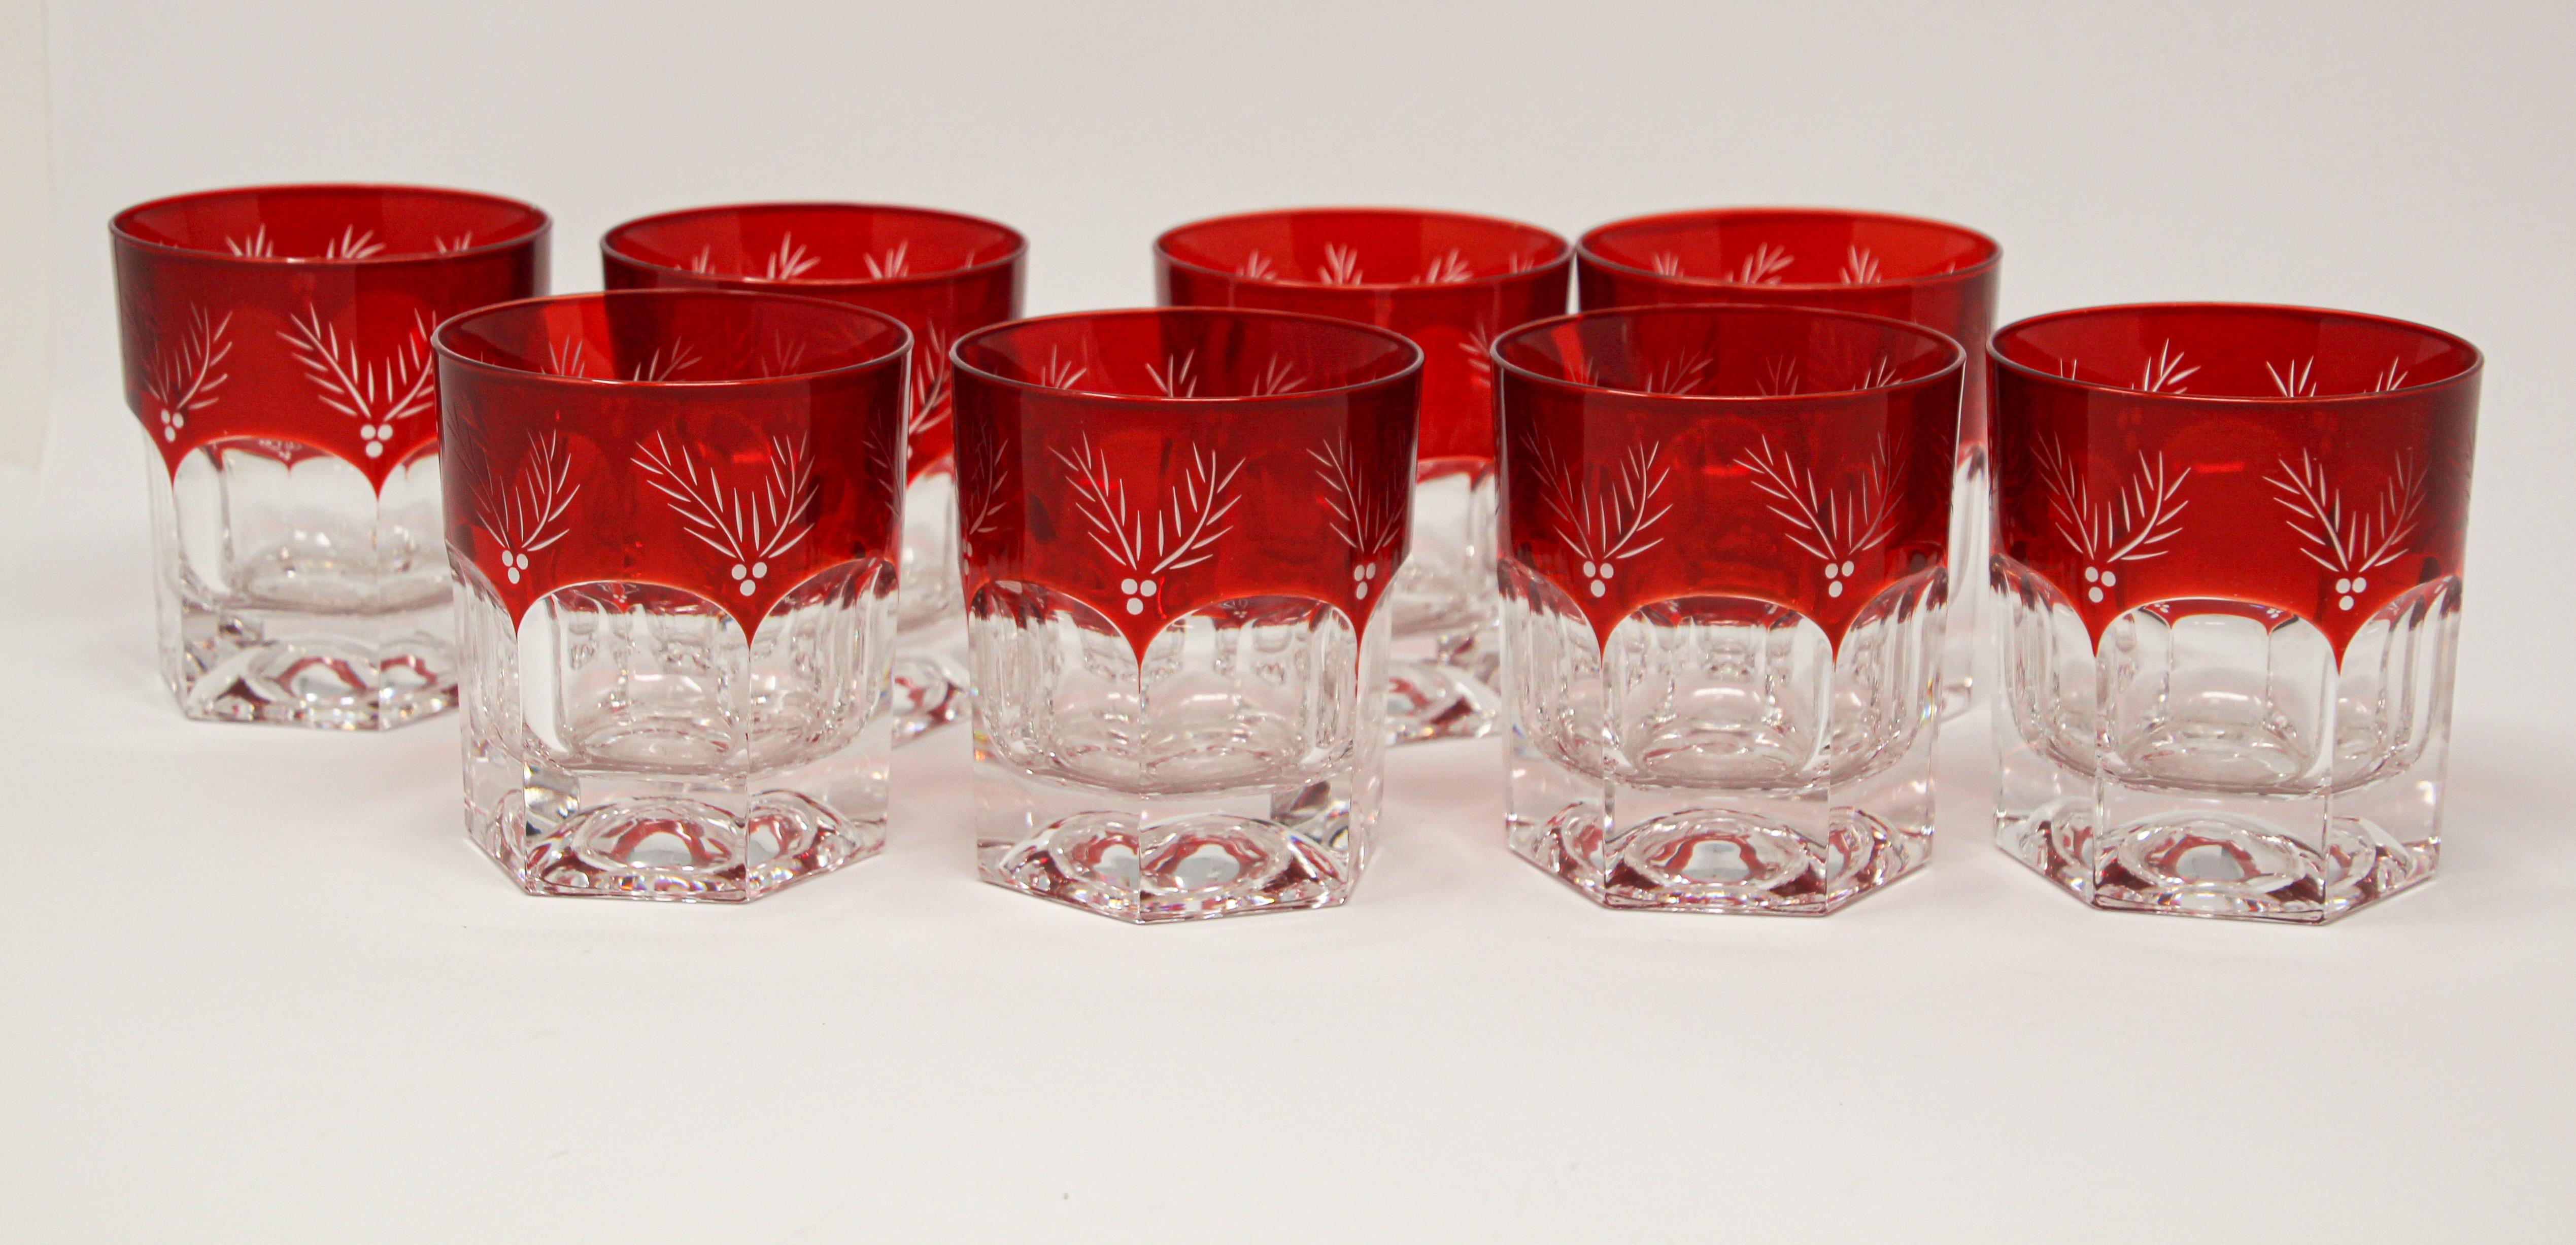 Set of eight cut crystal rocks' cocktail whiskey glasses tumbler red
Set of eight whiskey glasses tumbler cranberry red.
The vibrant hand blown rich ruby red crystal glass is cut to clear to reveal a lovely pattern with clean lines.
Set of 8 rock